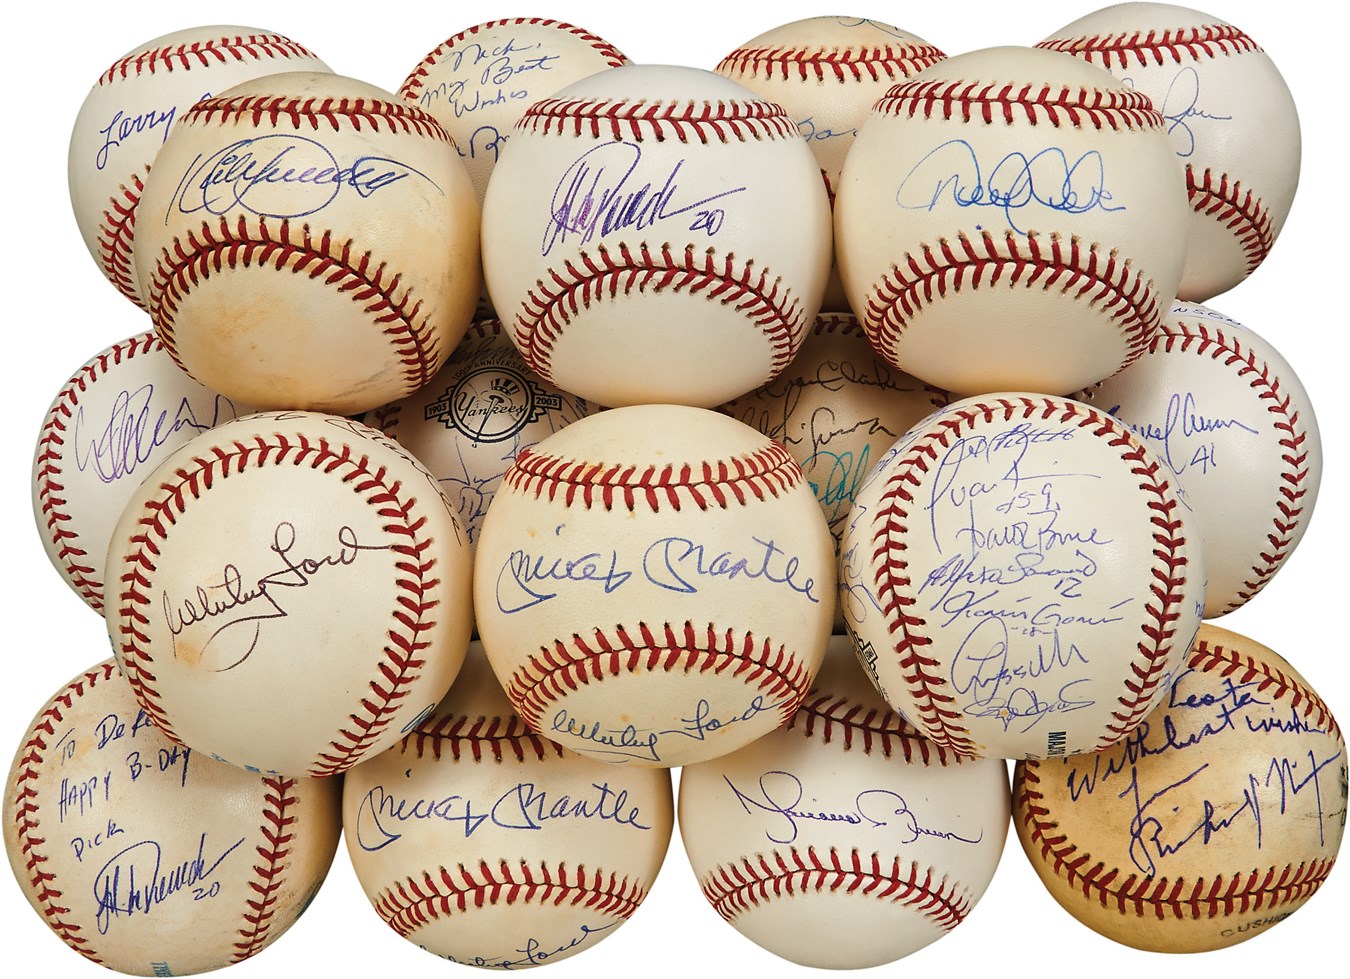 - Fantastic Signed Baseball Collection from ex-NY Yankee (425+)